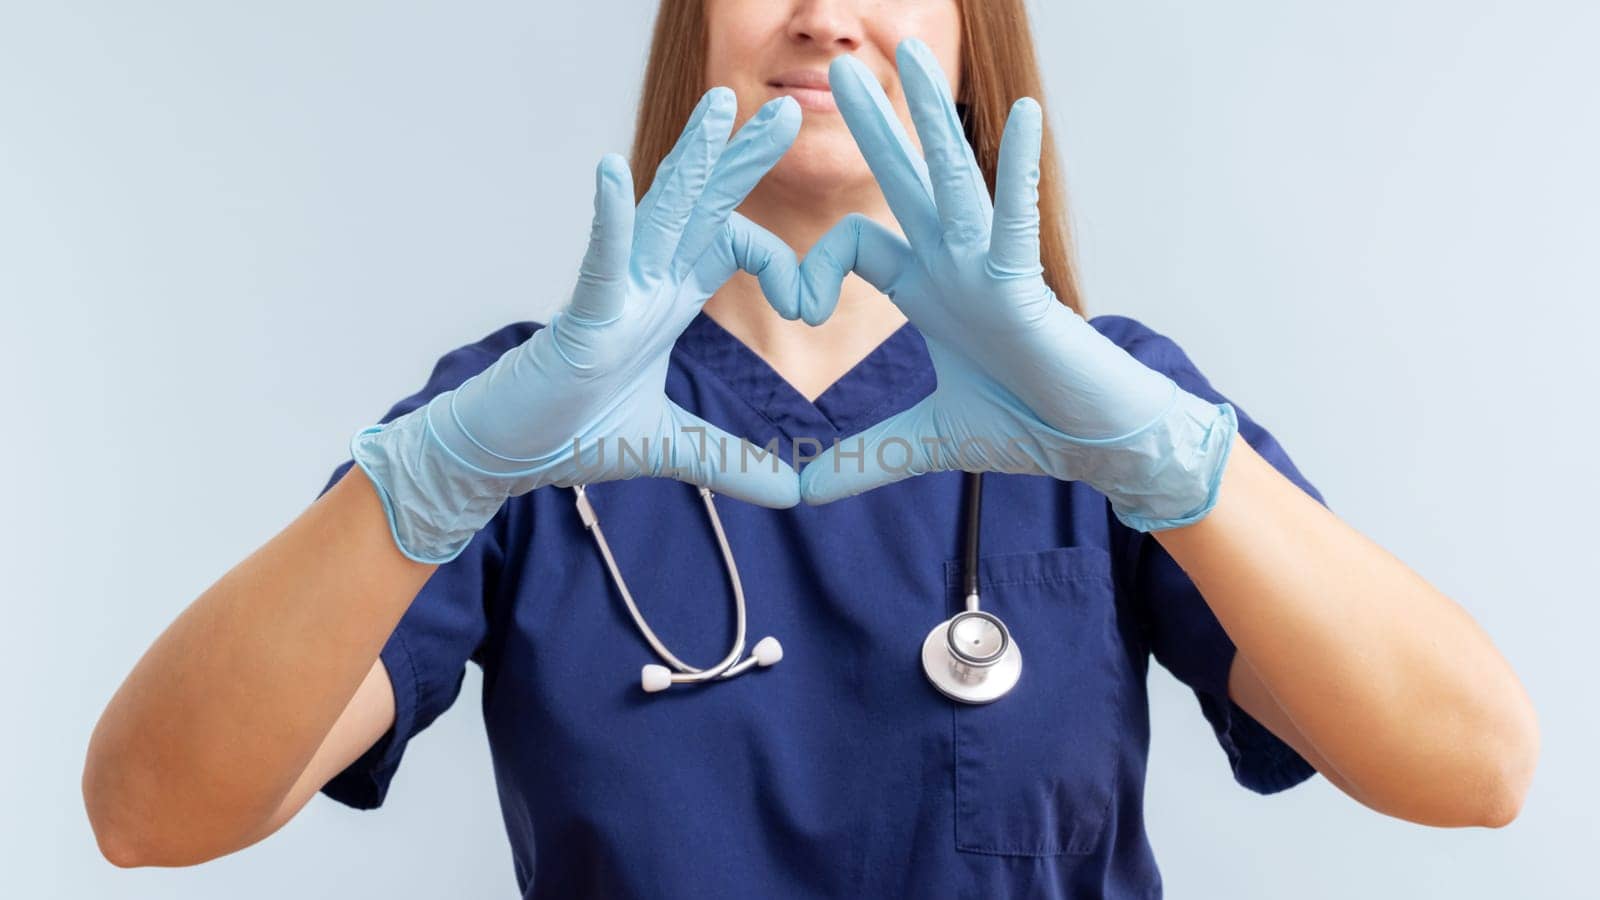 Nurse Making Heart Sign with Hands by andreyz